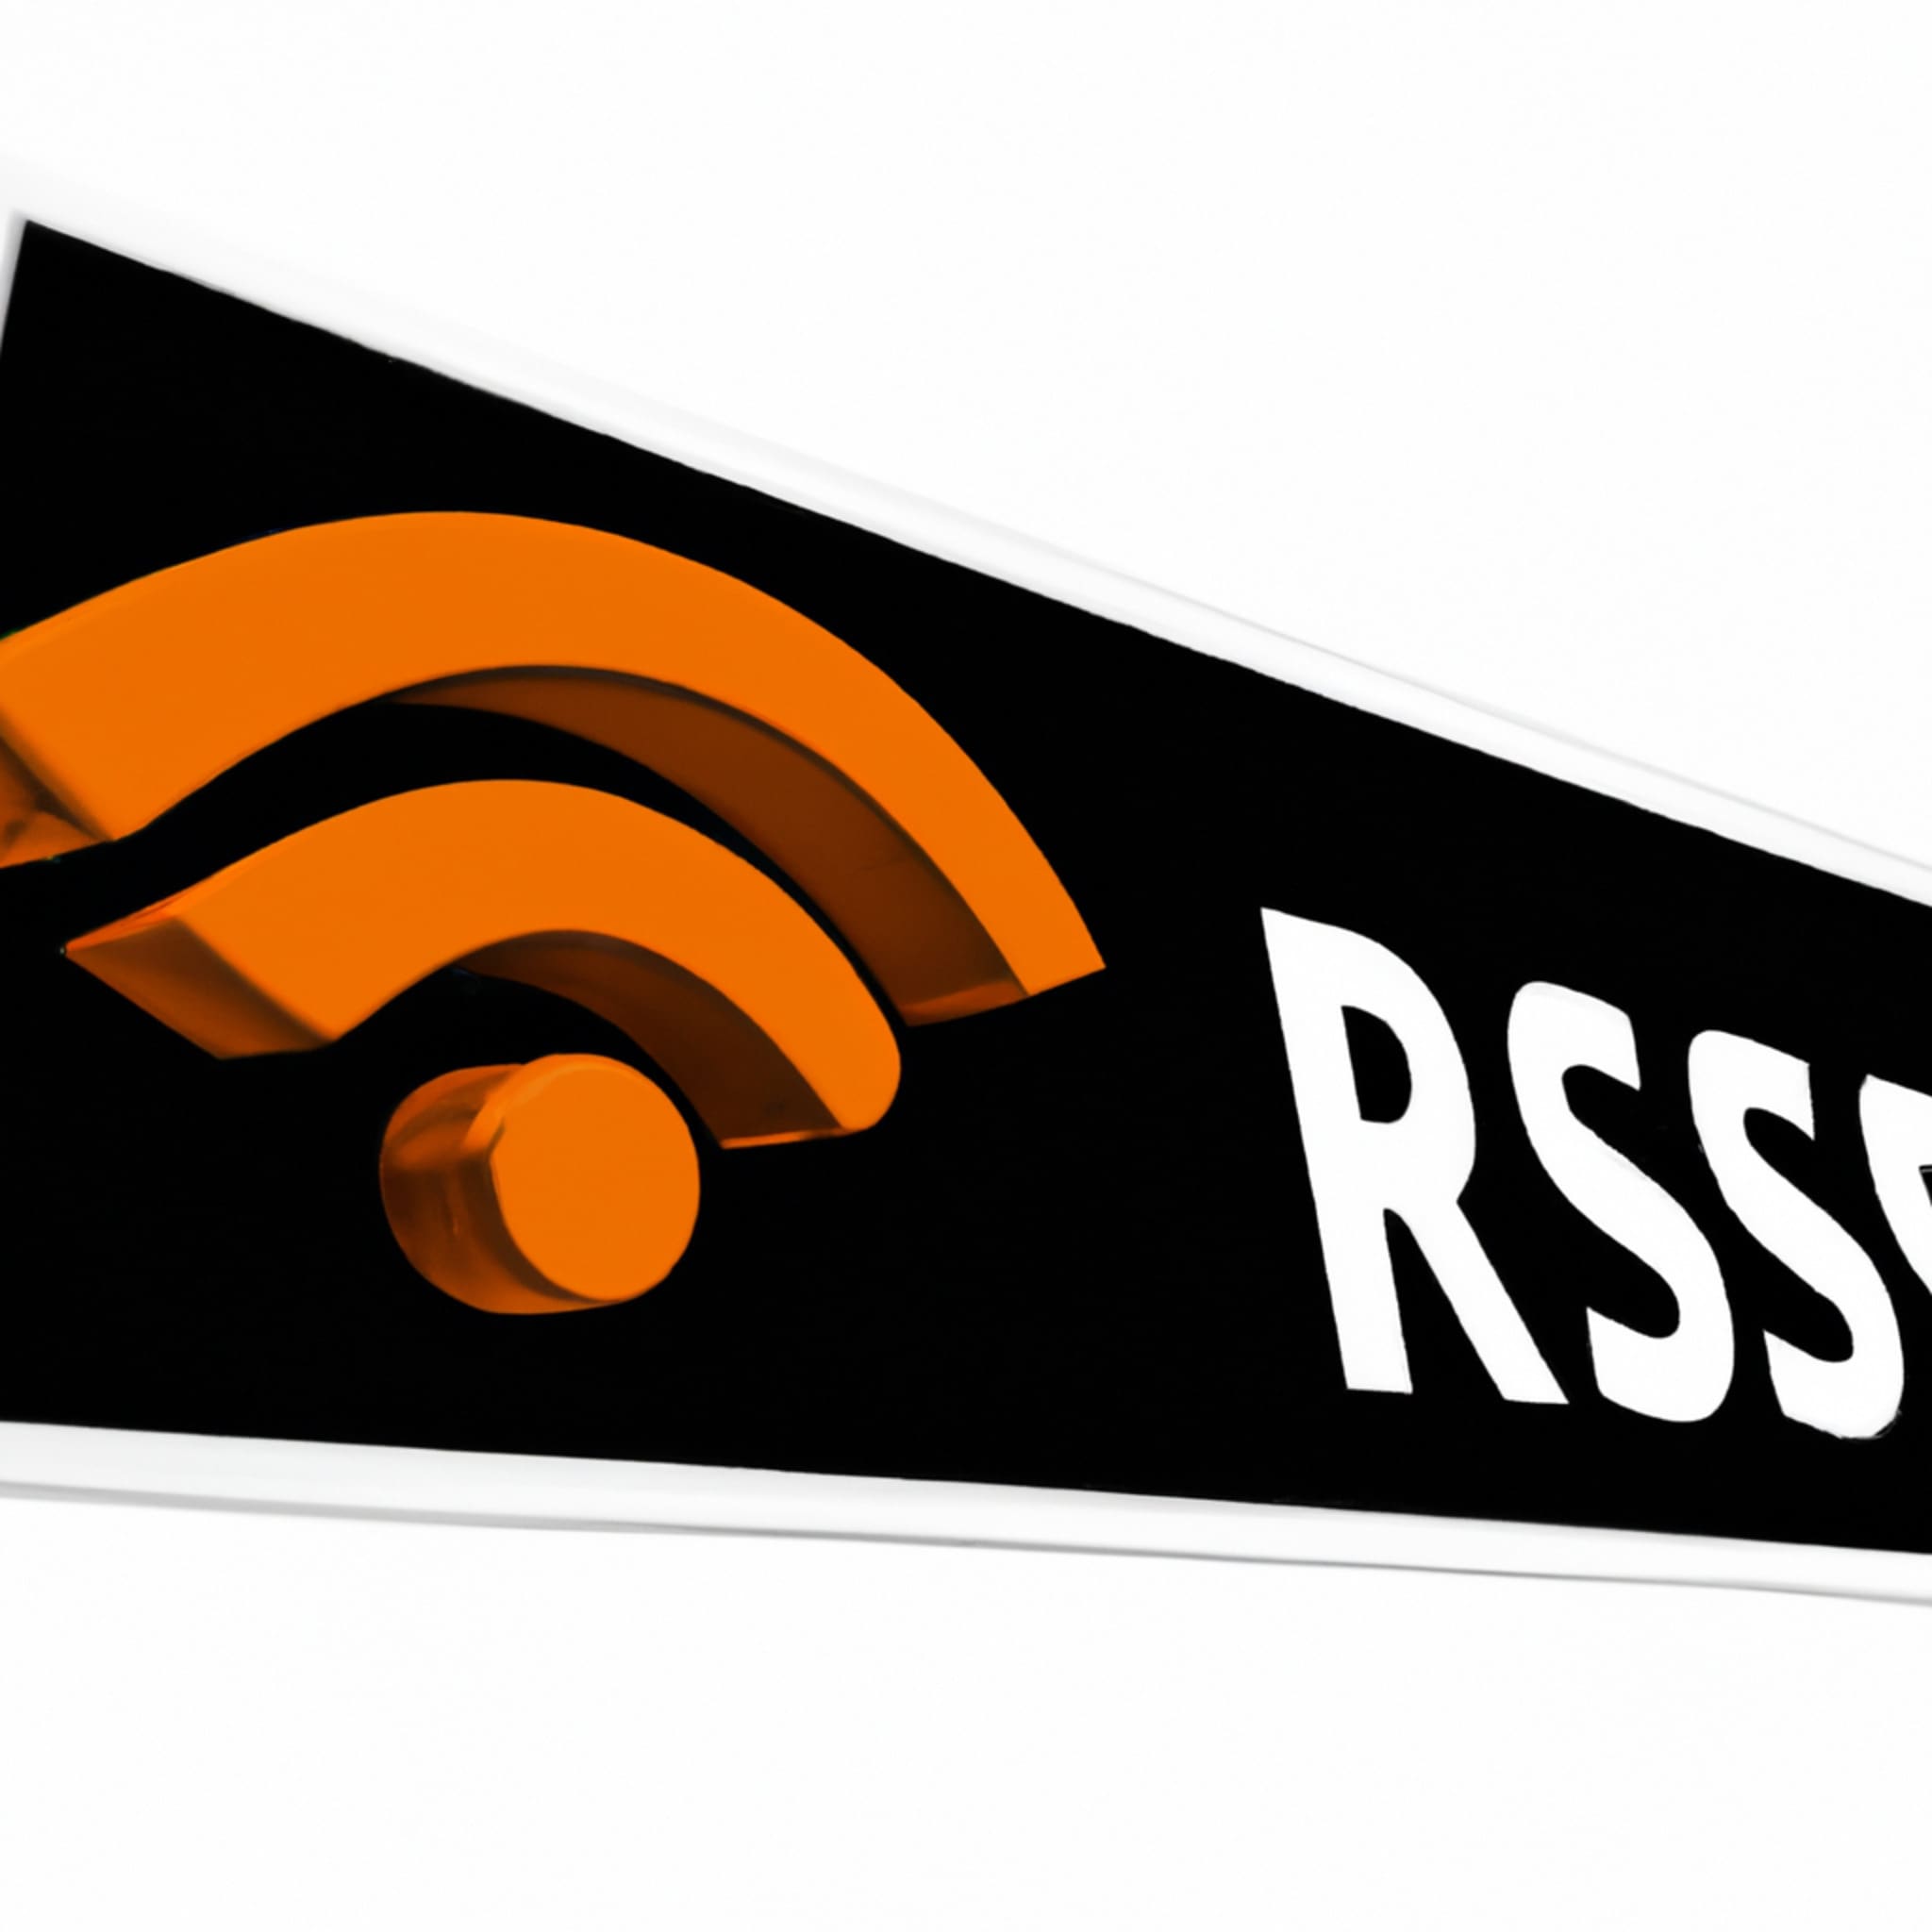 Radio Clash is moving hosts from Libsyn – please check your RSS url!